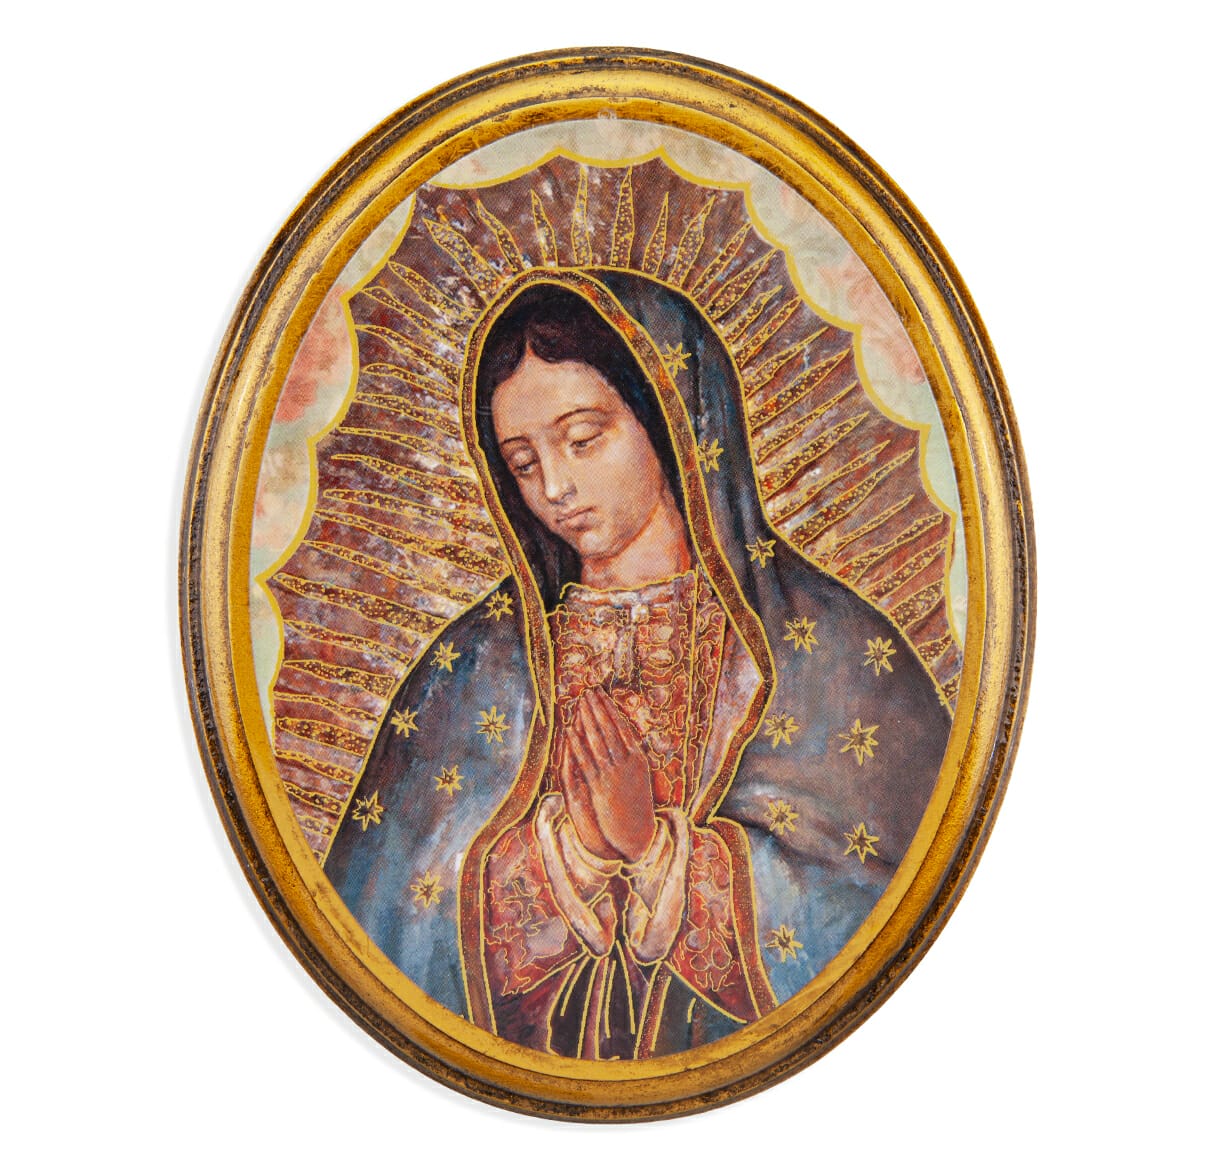 Our Lady of Guadalupe Bust Antiqued Wood Plaque - Buy Religious ...